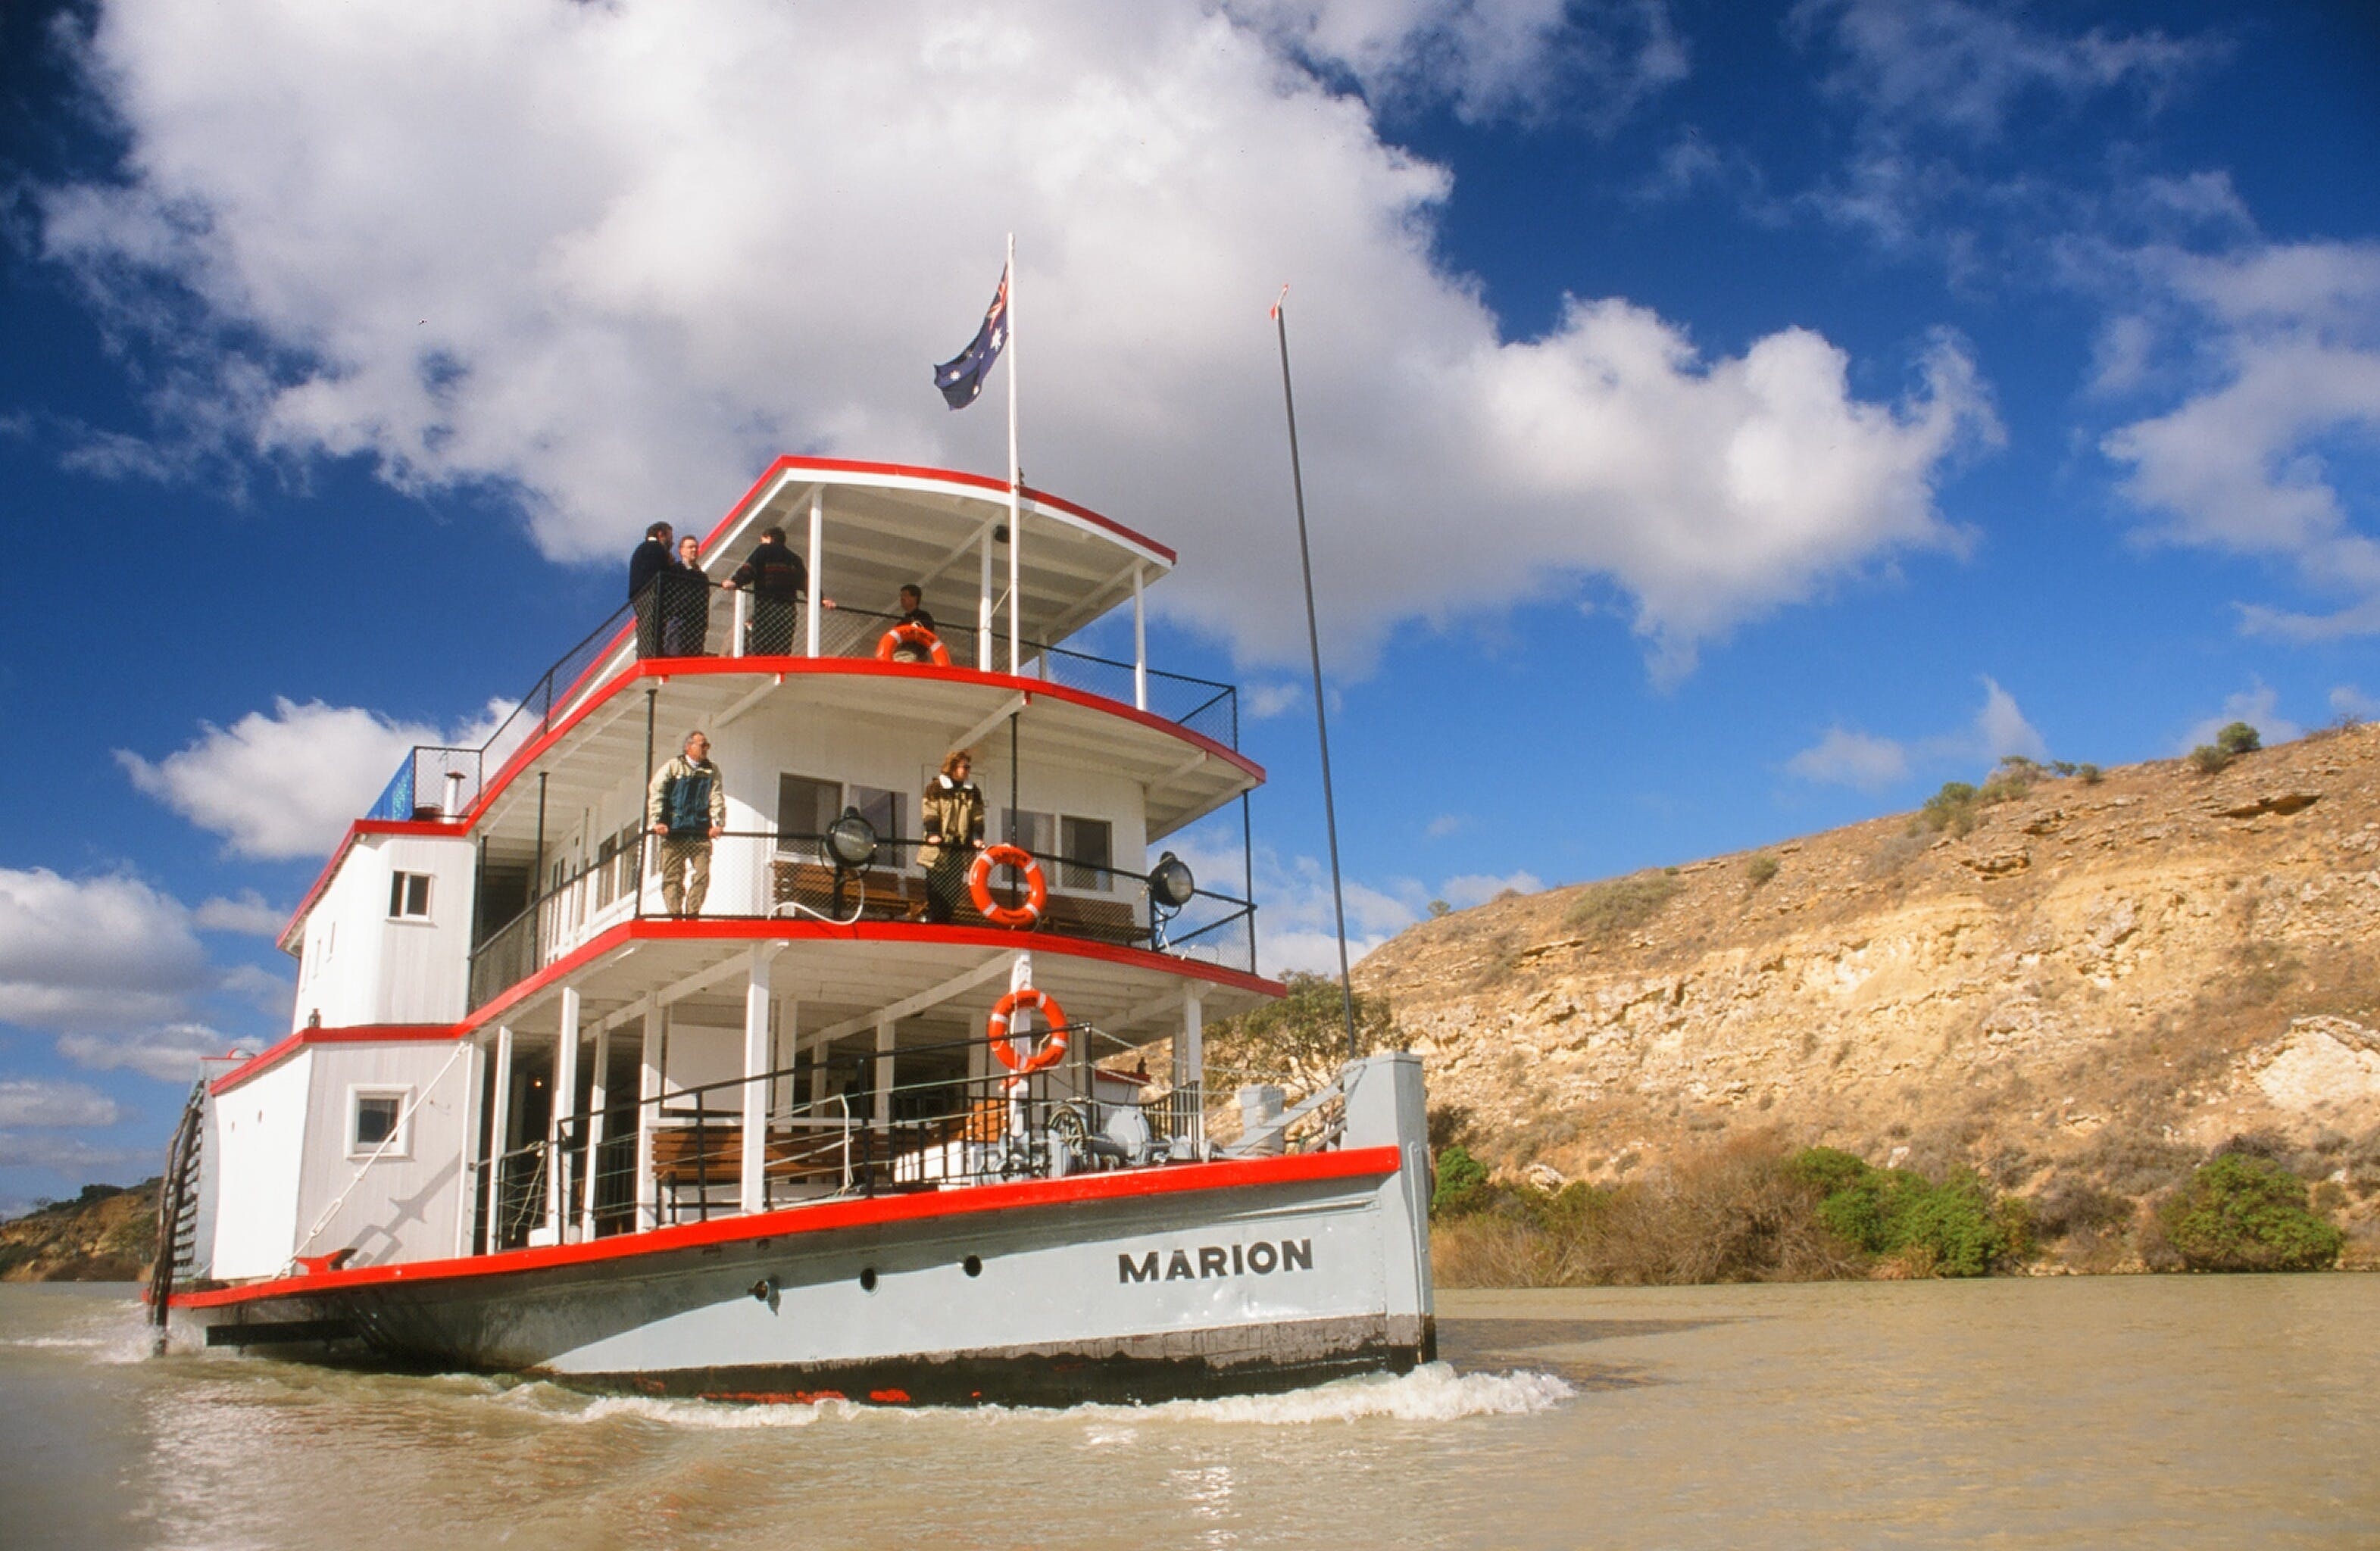 PS Marion Short Cruises - all cruises cancelled until further notice - Broome Tourism